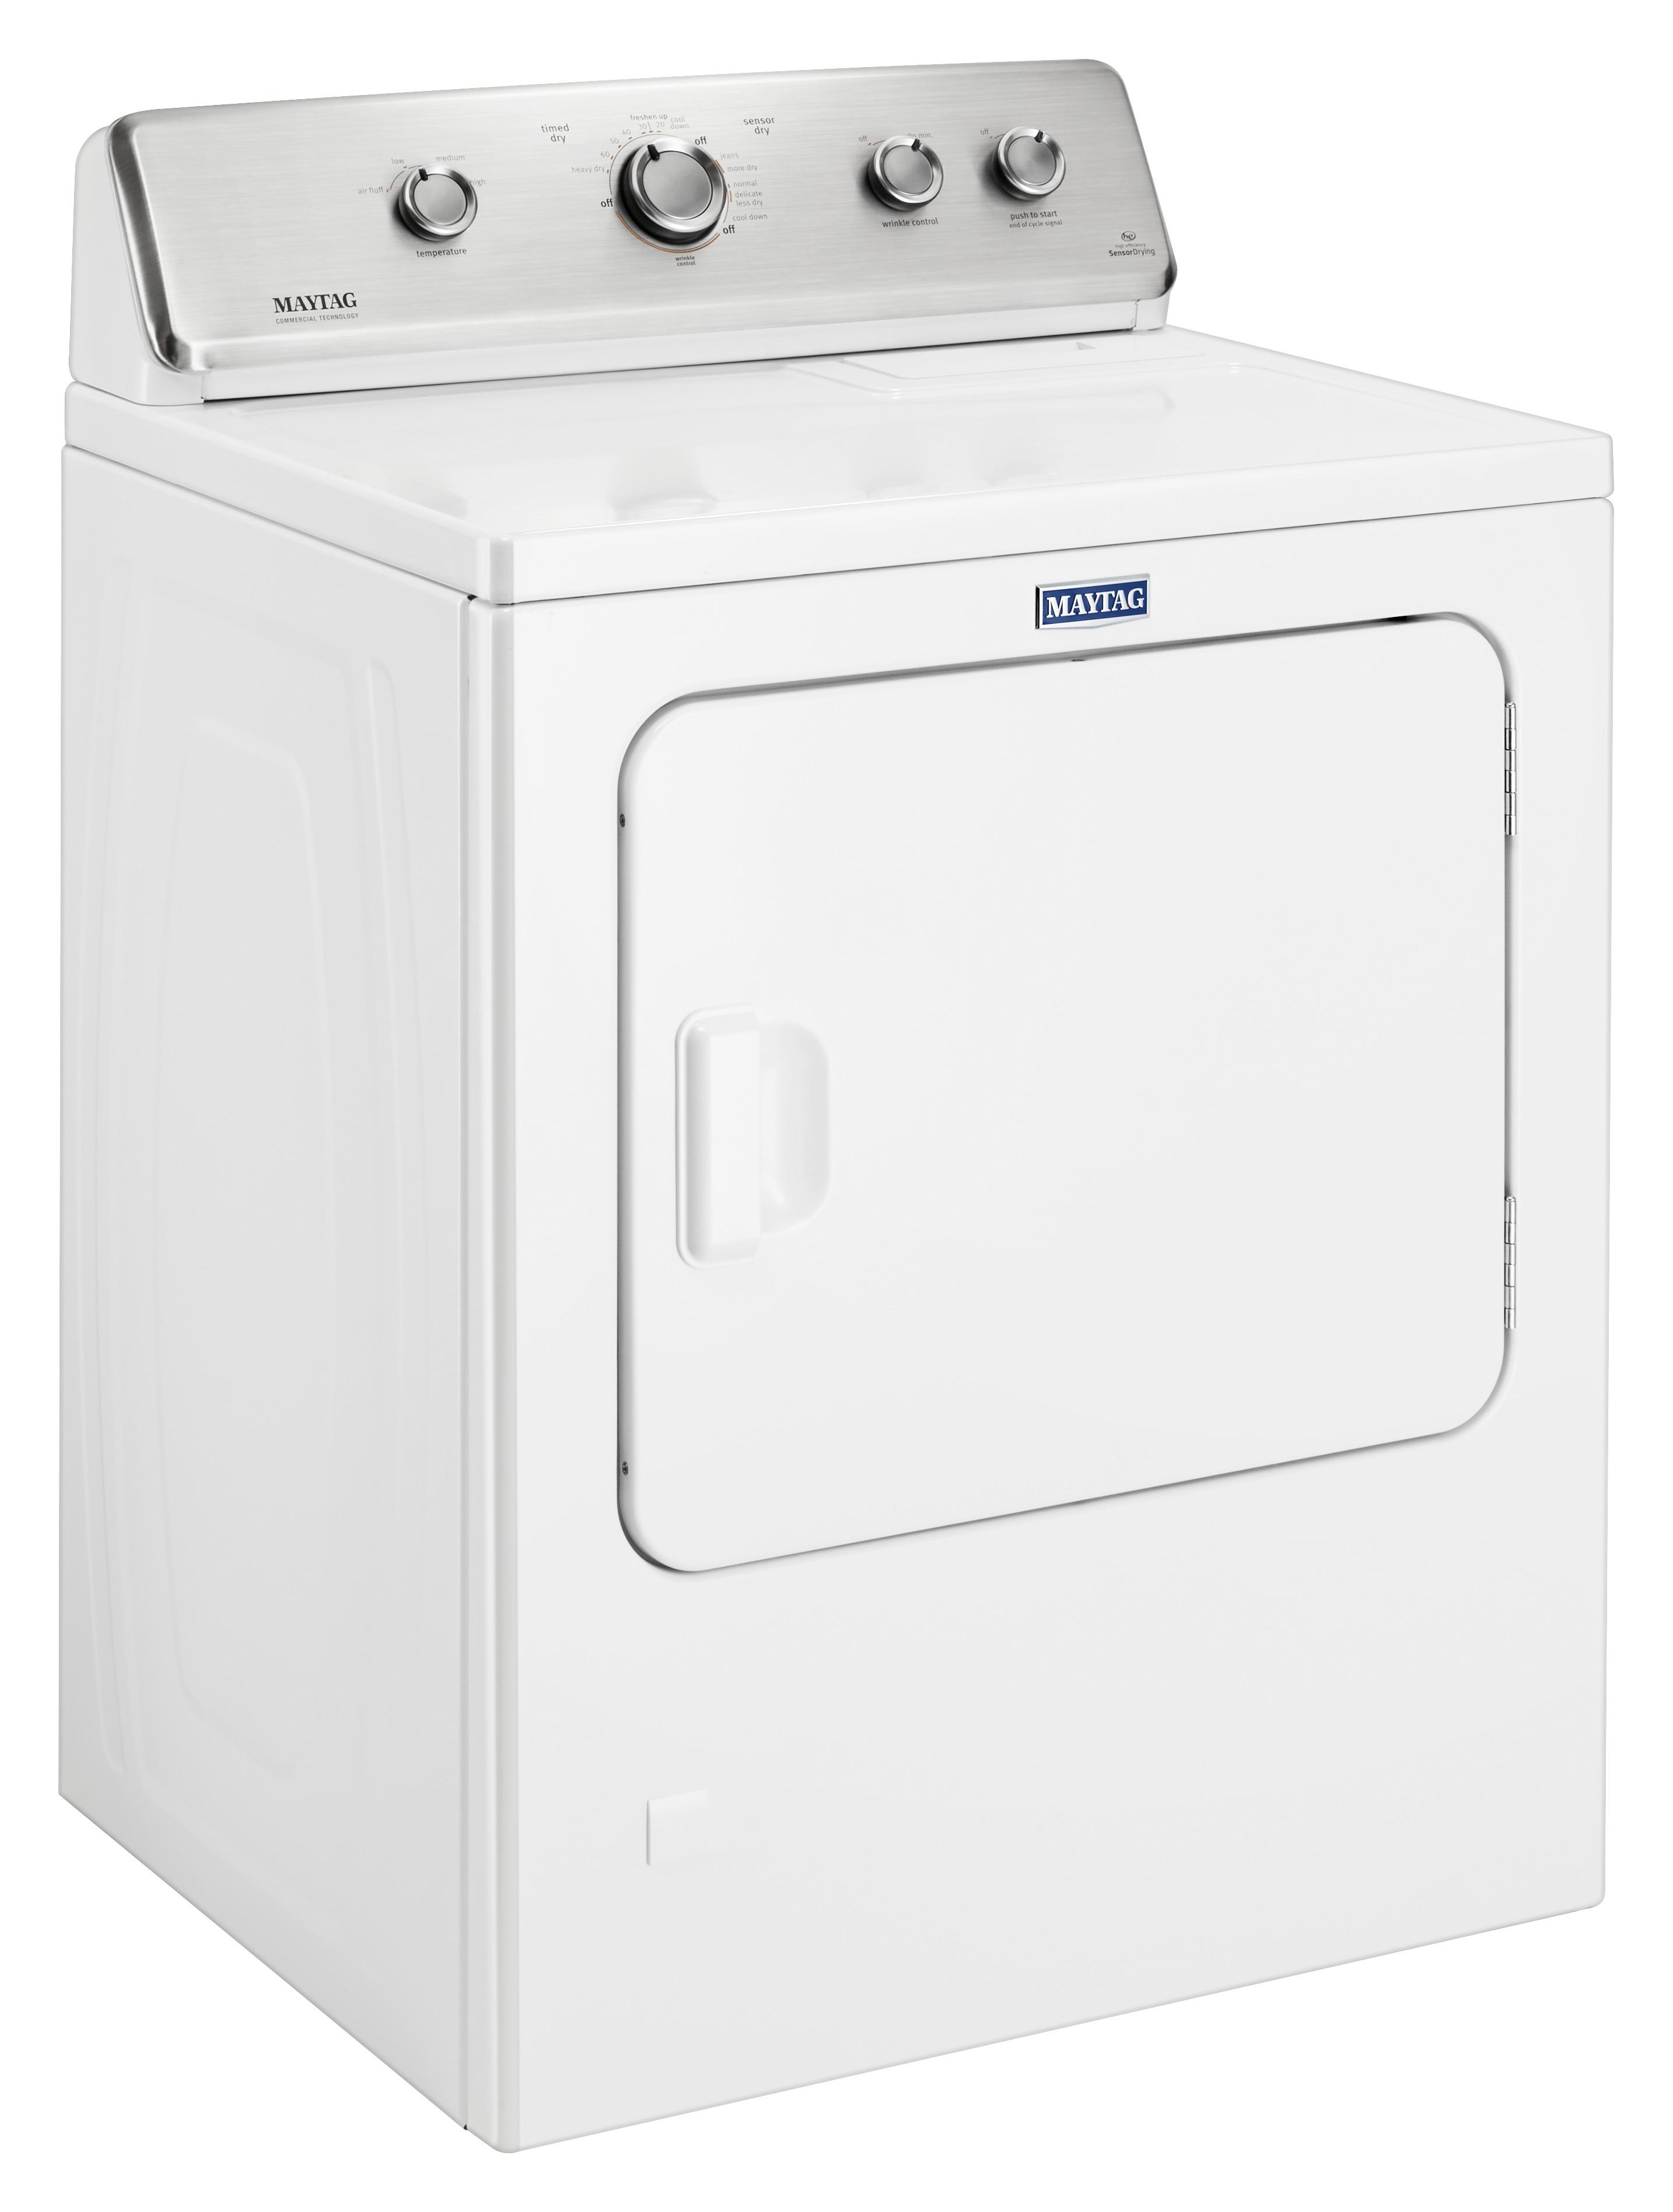 Angle View: Maytag - 7 Cu. Ft. Gas Dryer with Wrinkle Control Cycle - White